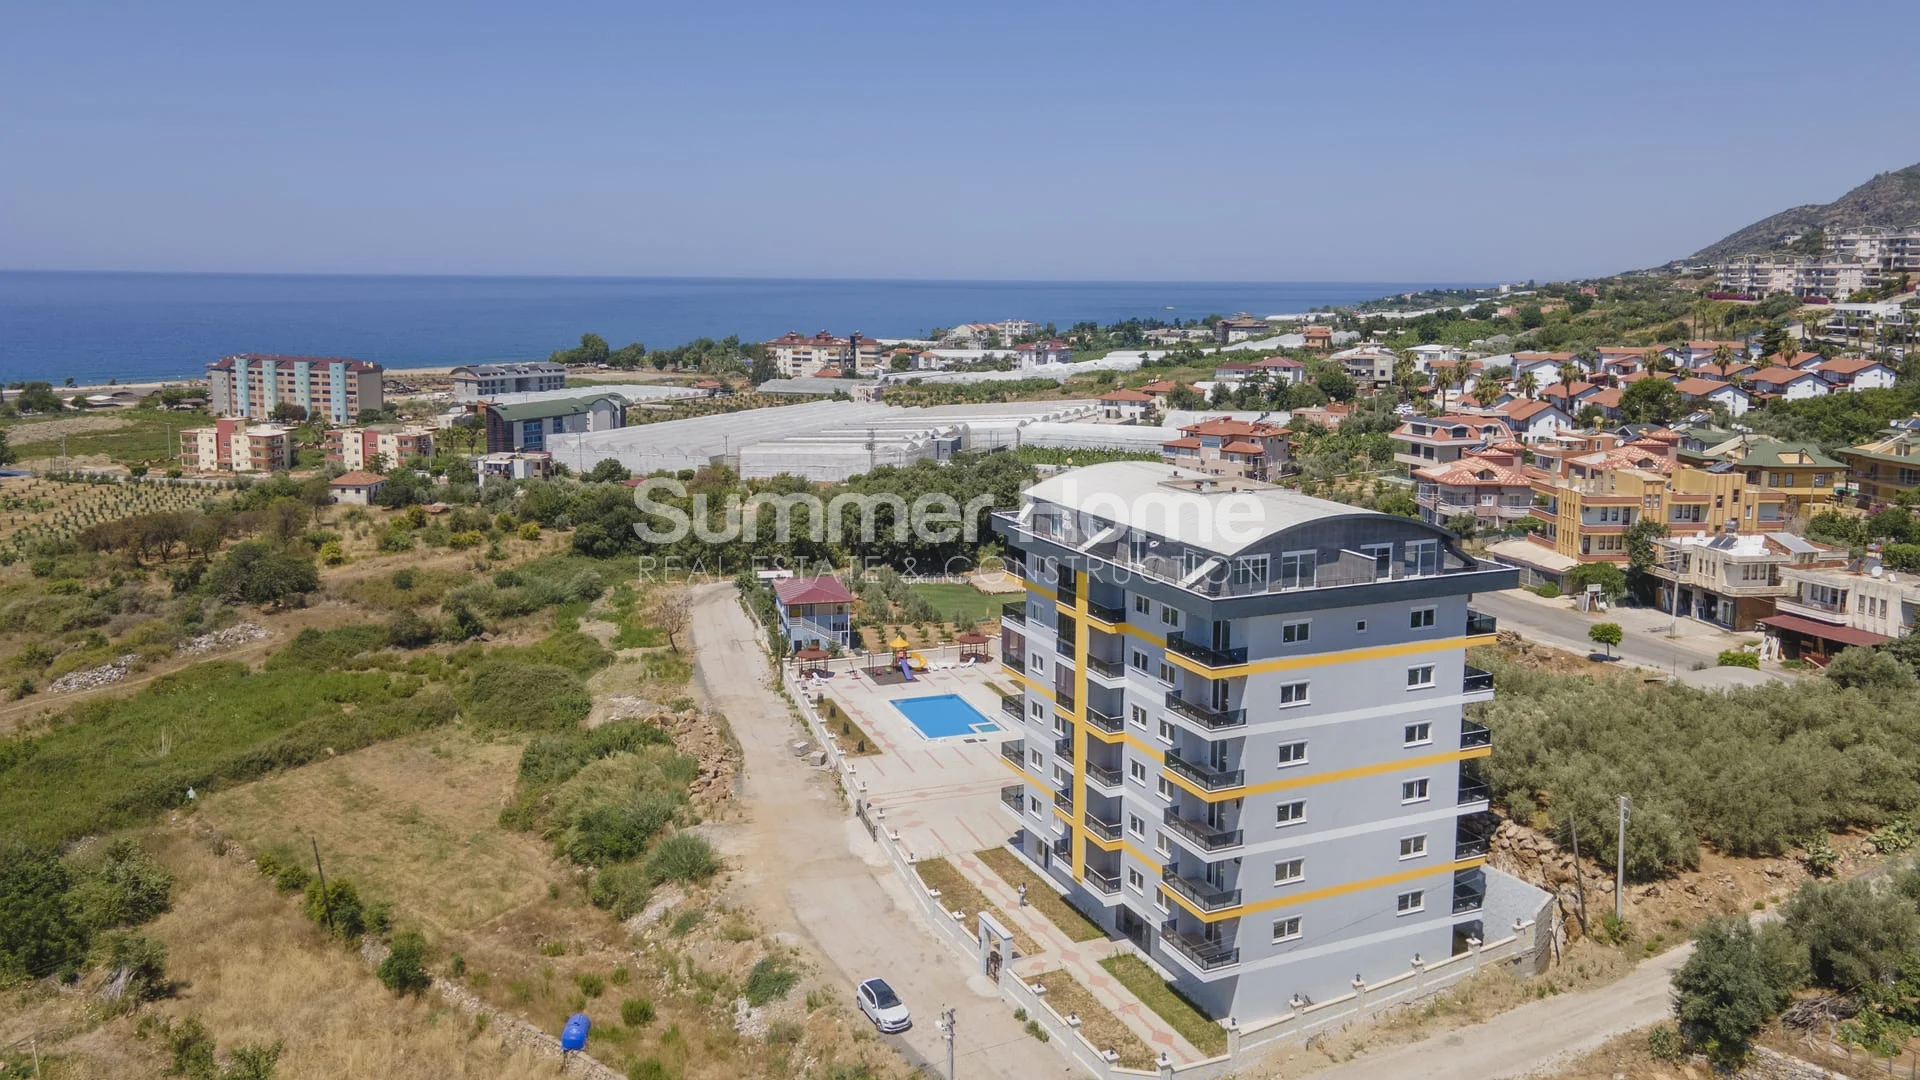 Lovely Sea View Apartments in Demirtas general - 2